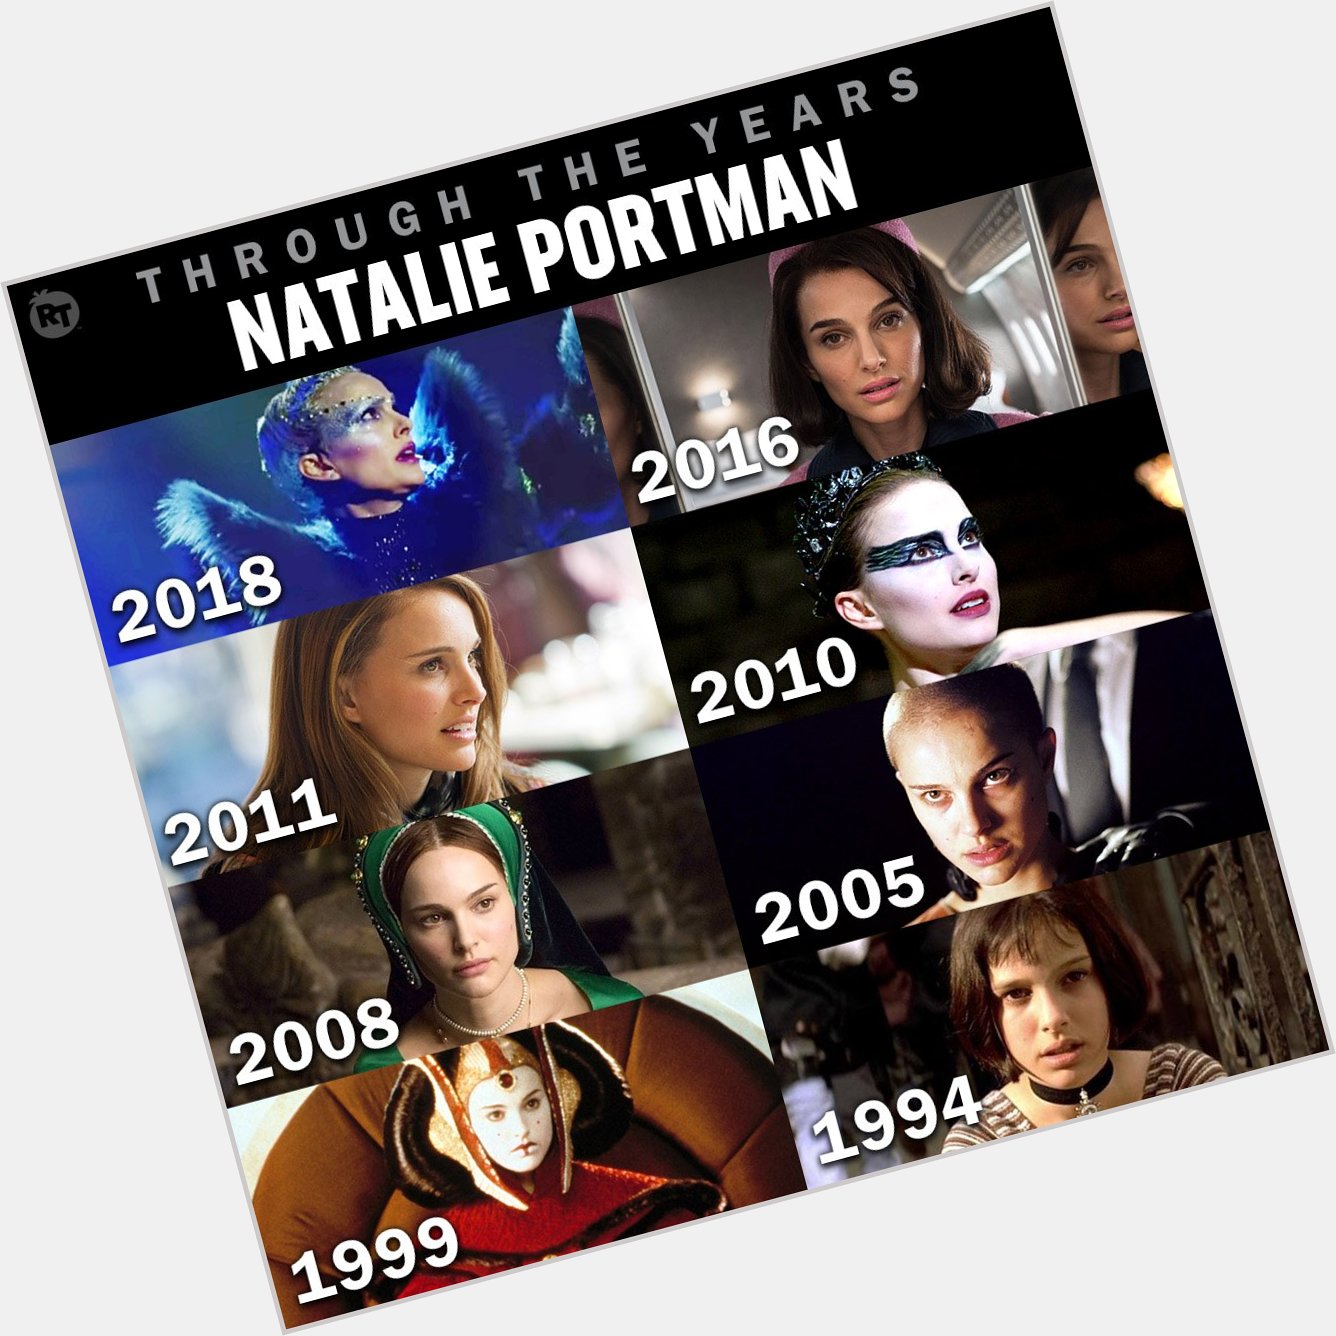 Happy birthday Natalie Portman! Which of her roles is your favorite? 